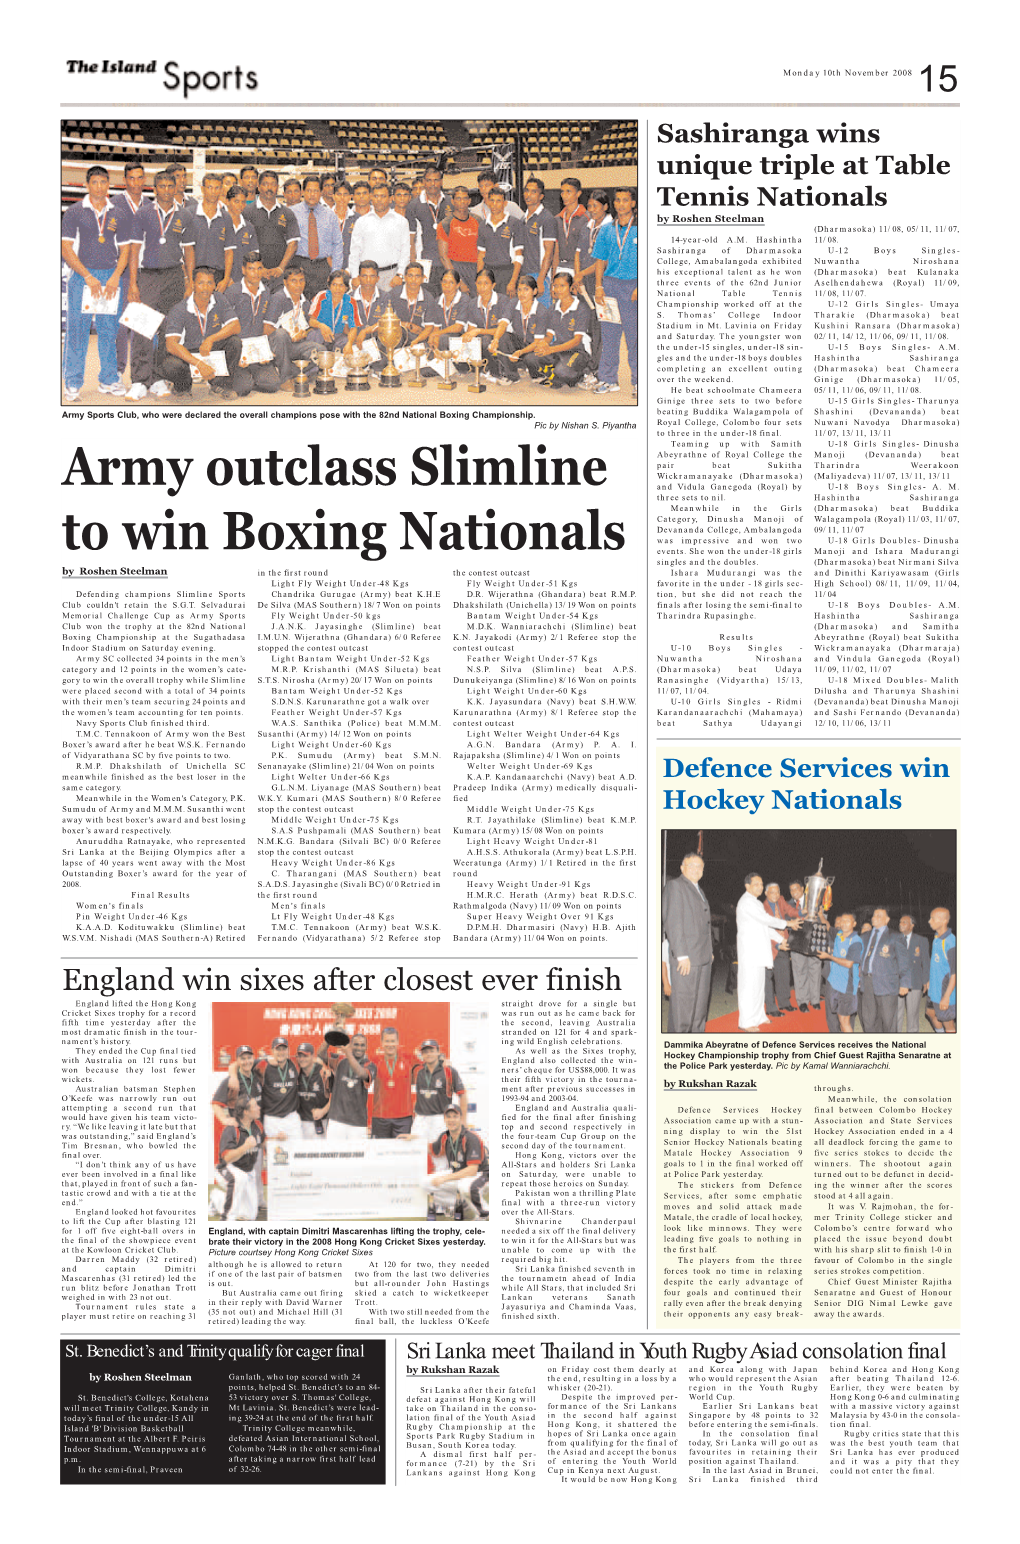 Army Outclass Slimline to Win Boxing Nationals